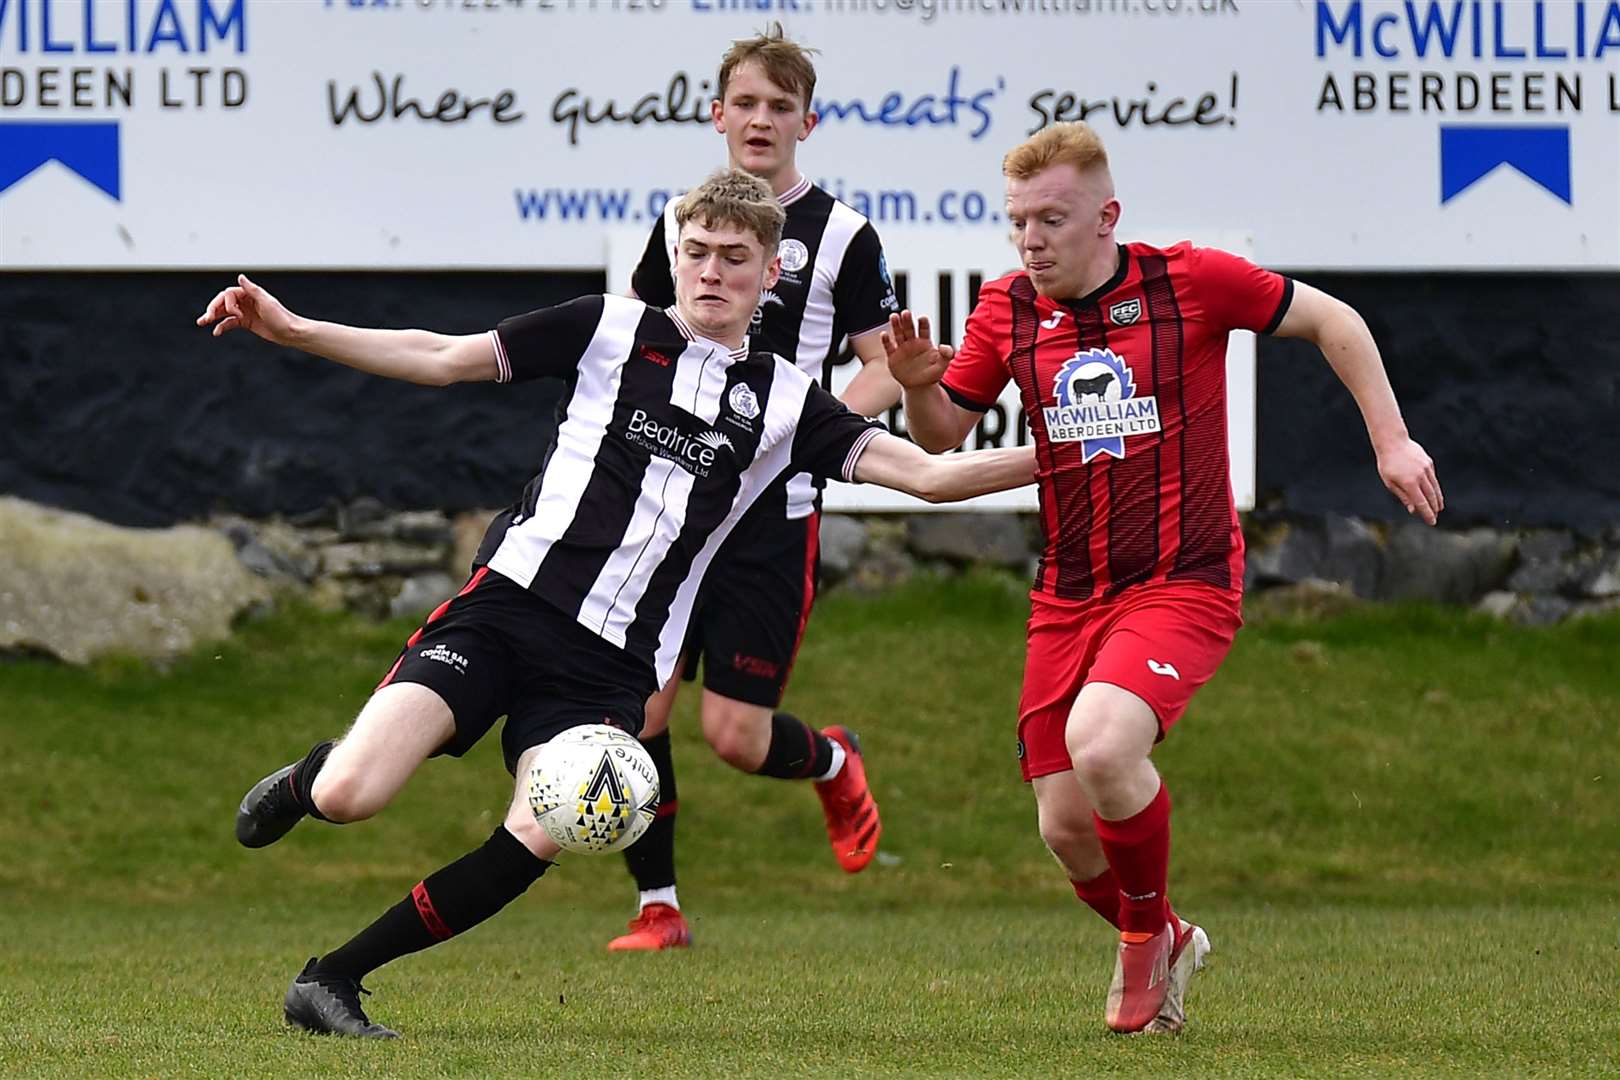 Wick's Joe Anderson about to clear ball ahead of Fraserburgh's Lewis Duncan